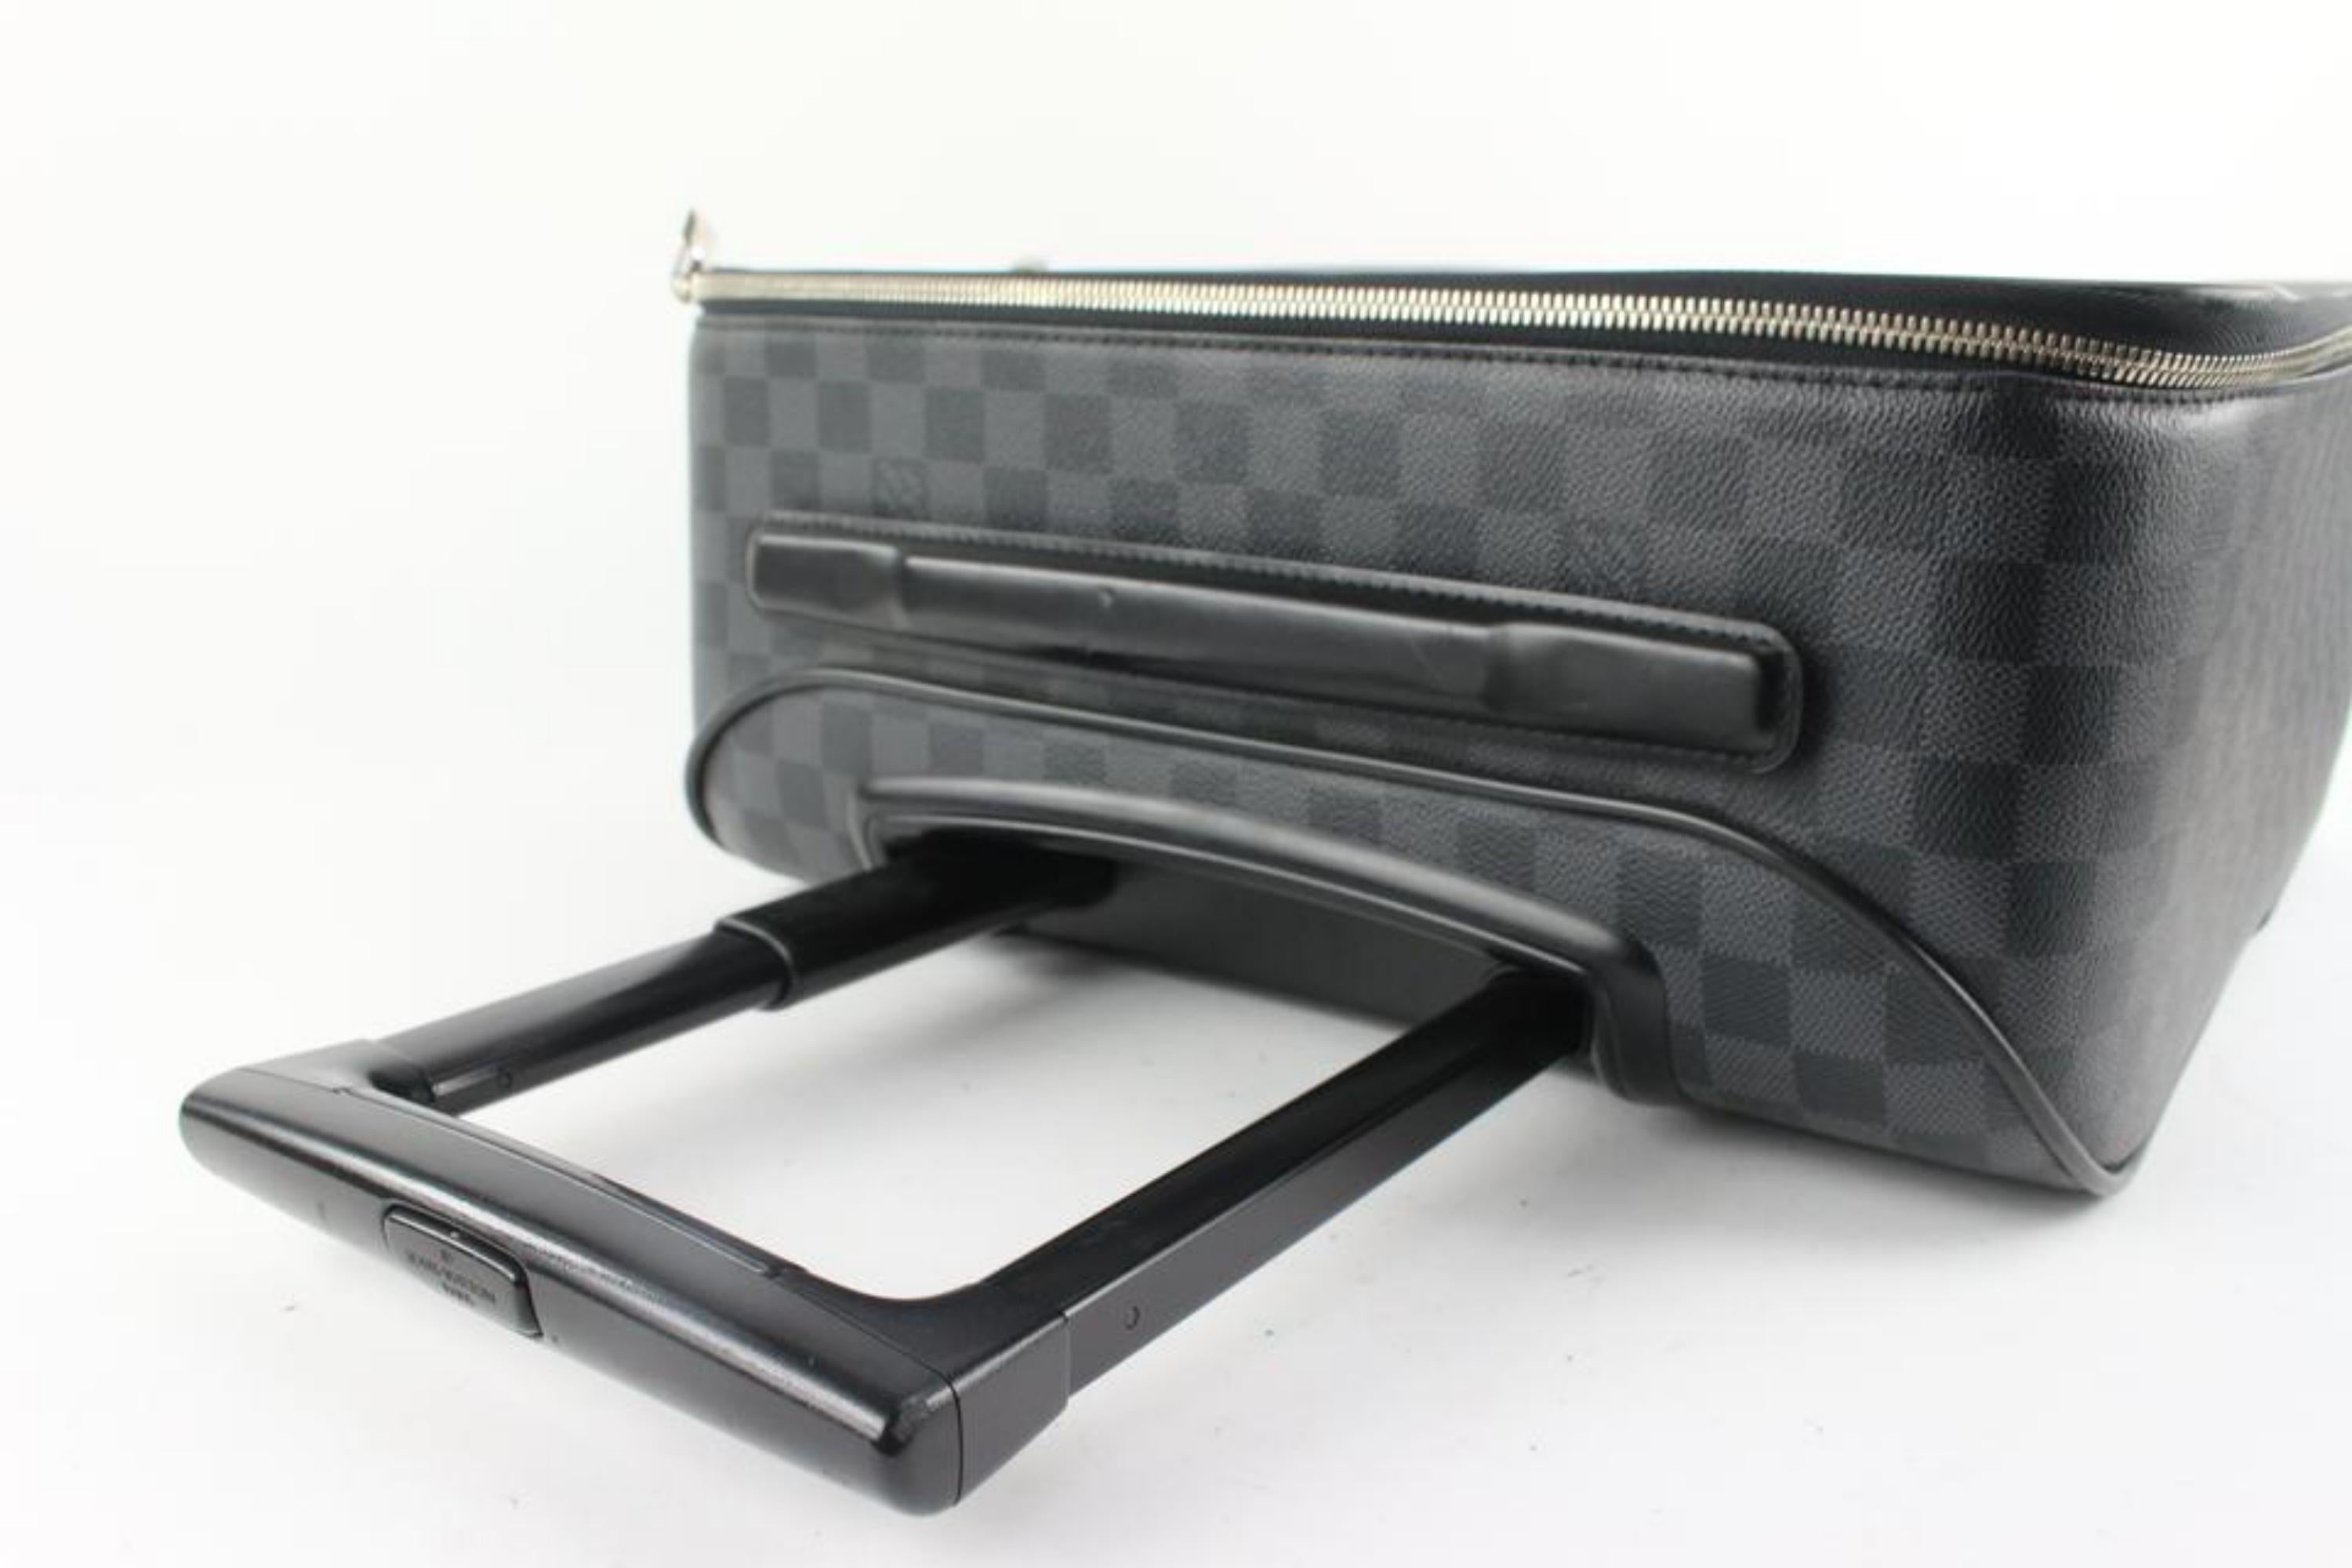 Louis Vuitton Damier Graphite Pegase 45 Rolling Luggage Trolley Suitcase 1223lv2 For Sale 1